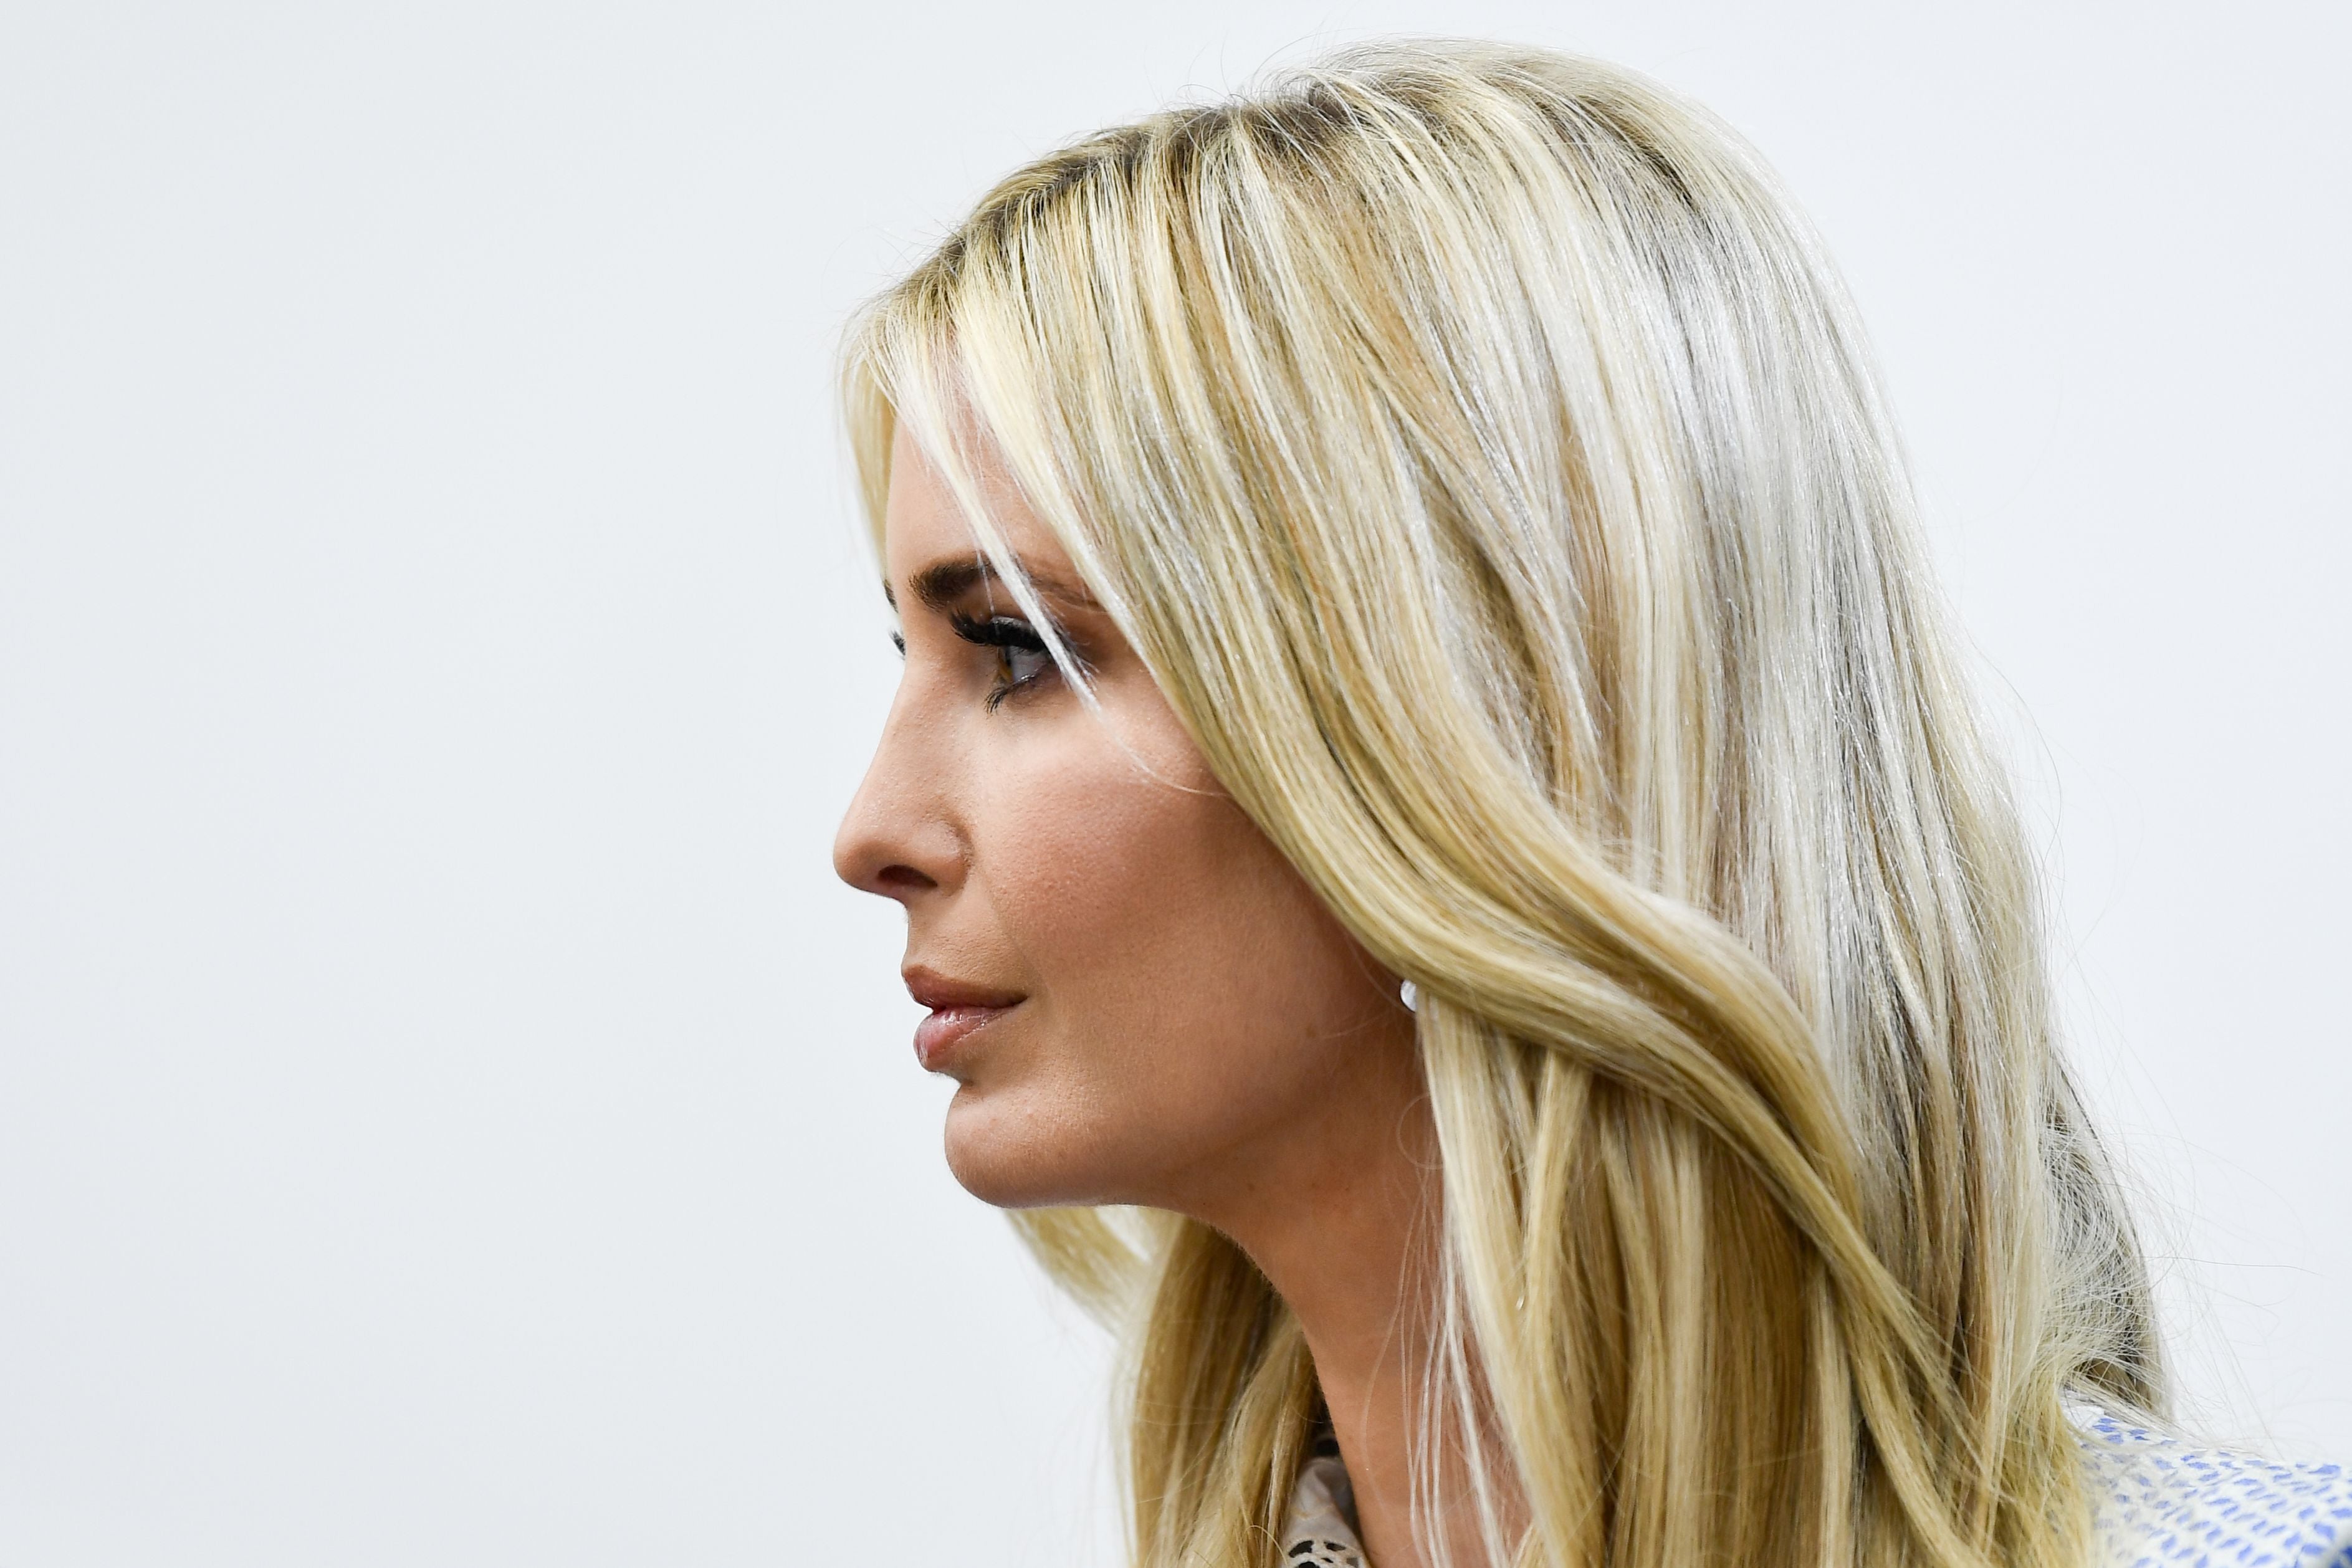 Ivanka Trump Slammed For 'Misleading' Tweet About Chicago's Deadly Weekend